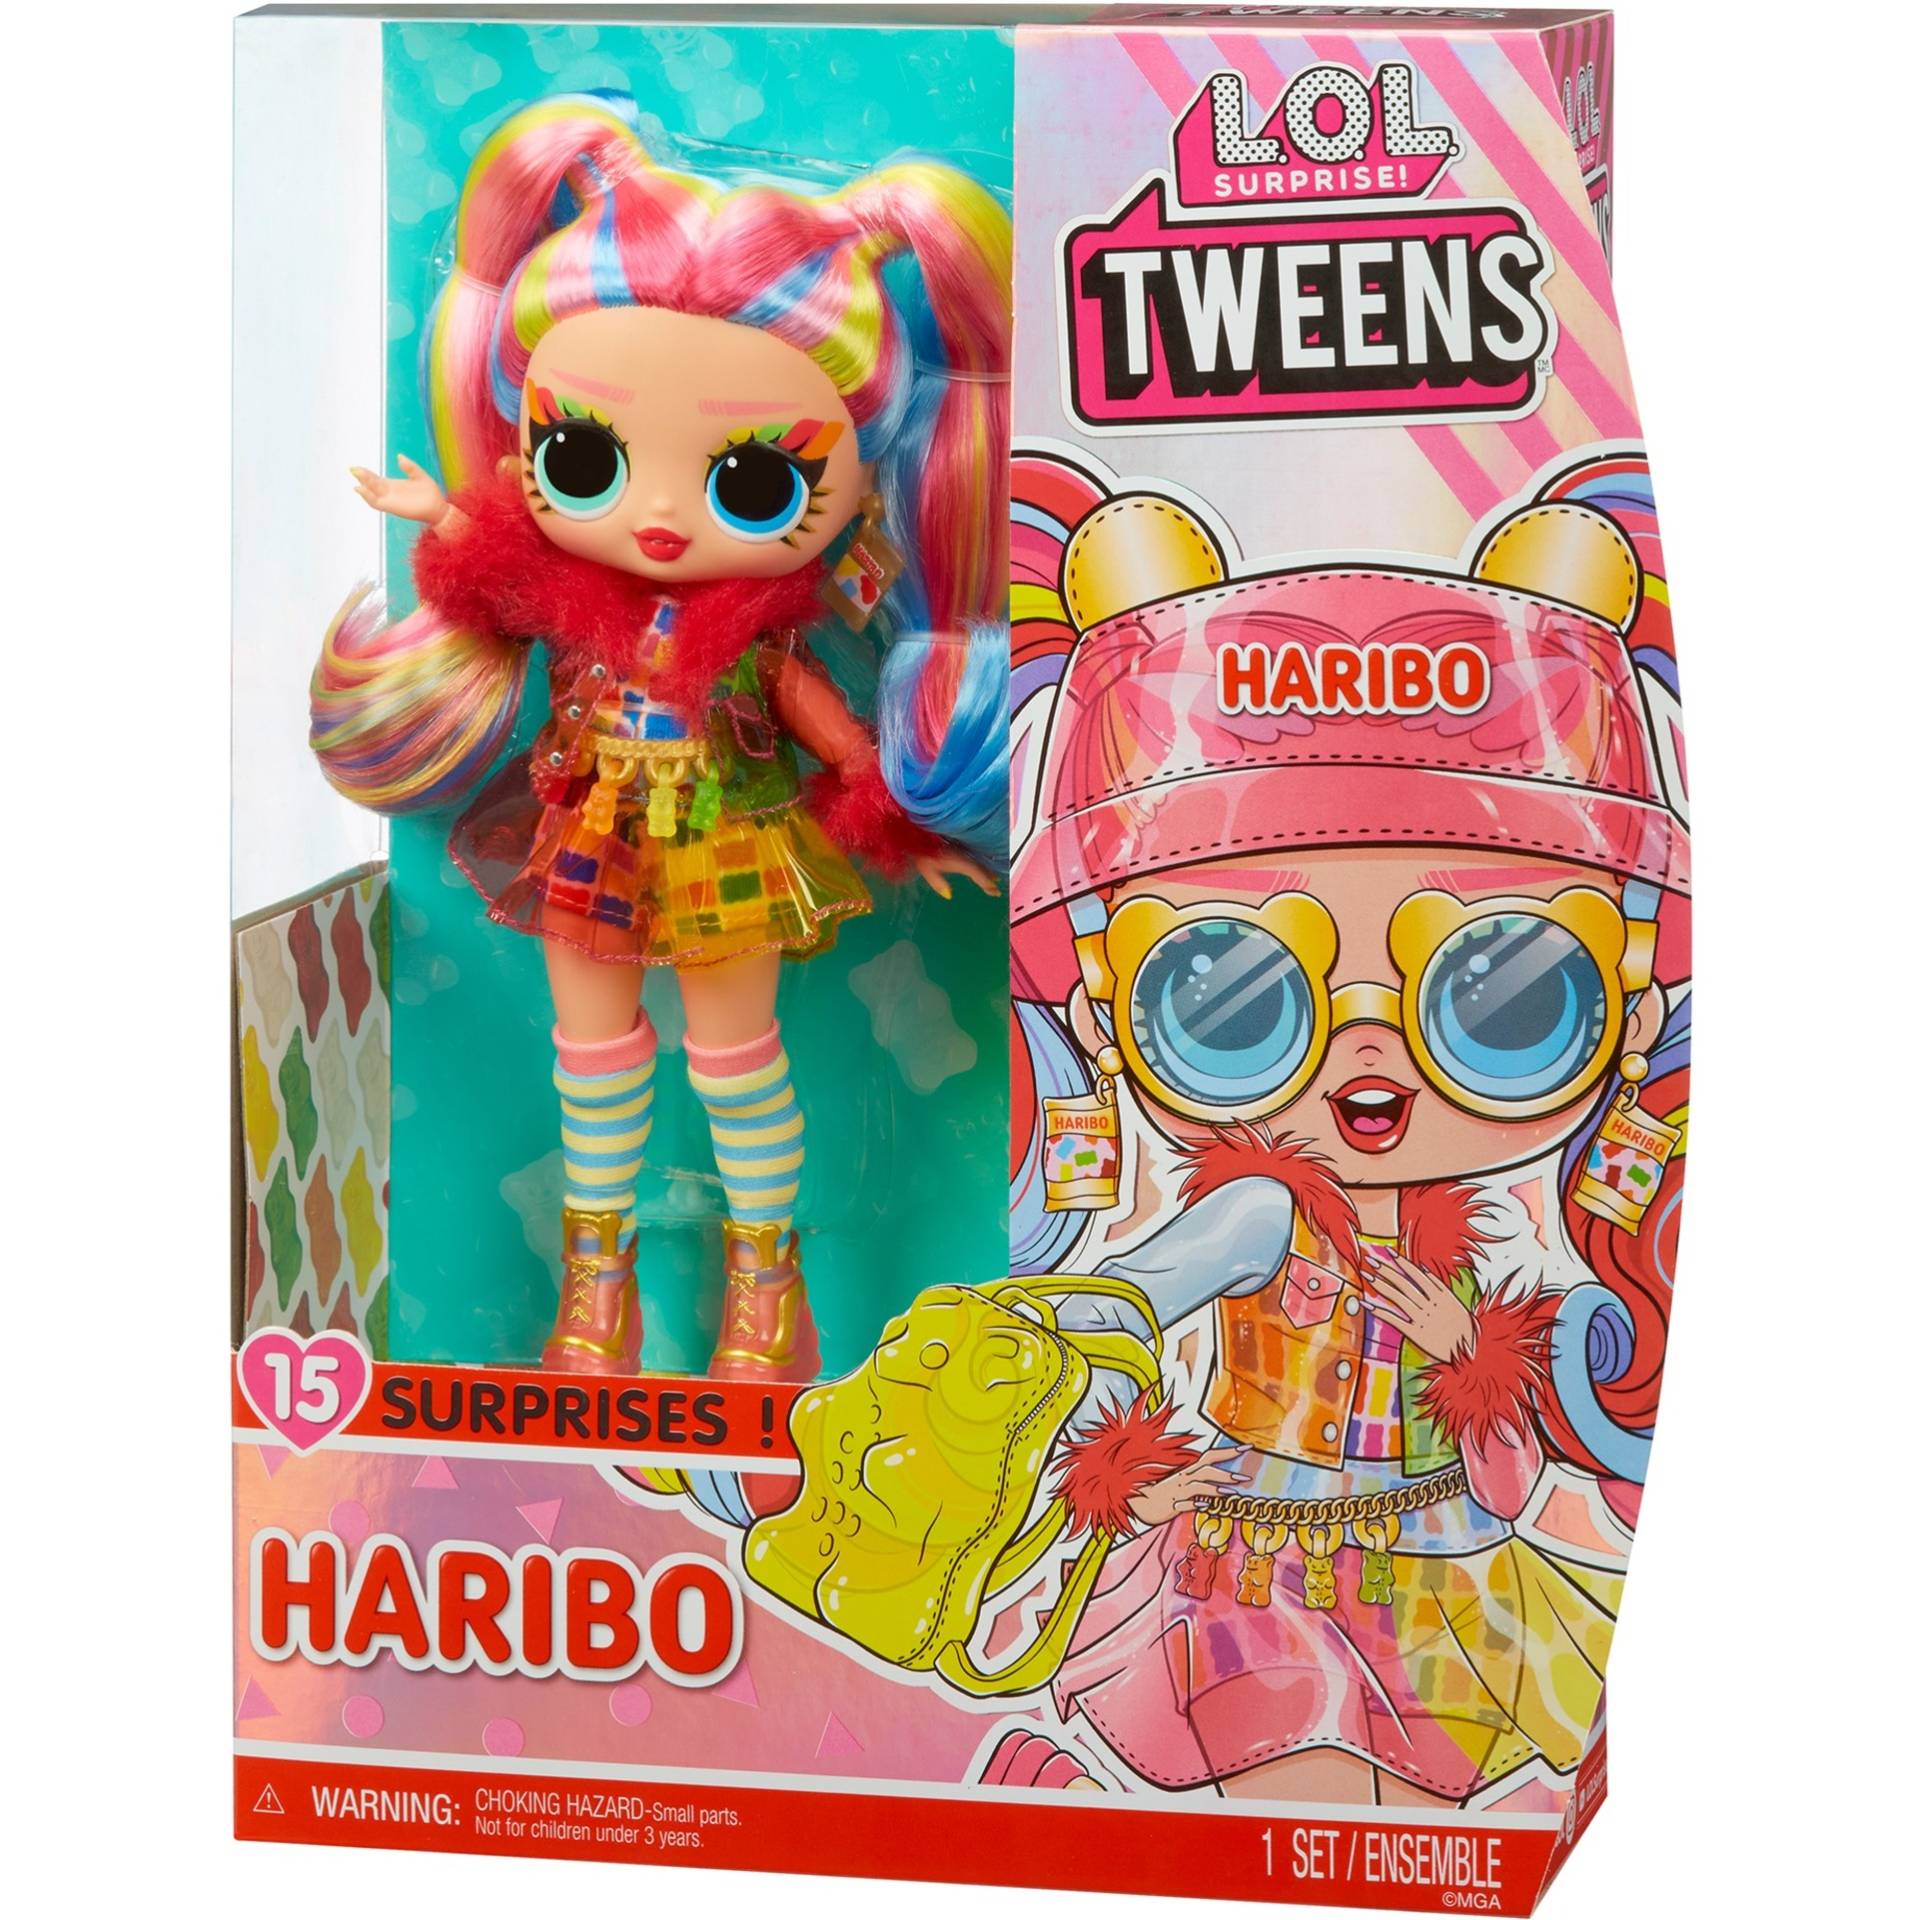 L.O.L Surprise Loves Mini Sweets X Haribo Tweens - Holly Happy, Puppe von MGA Entertainment